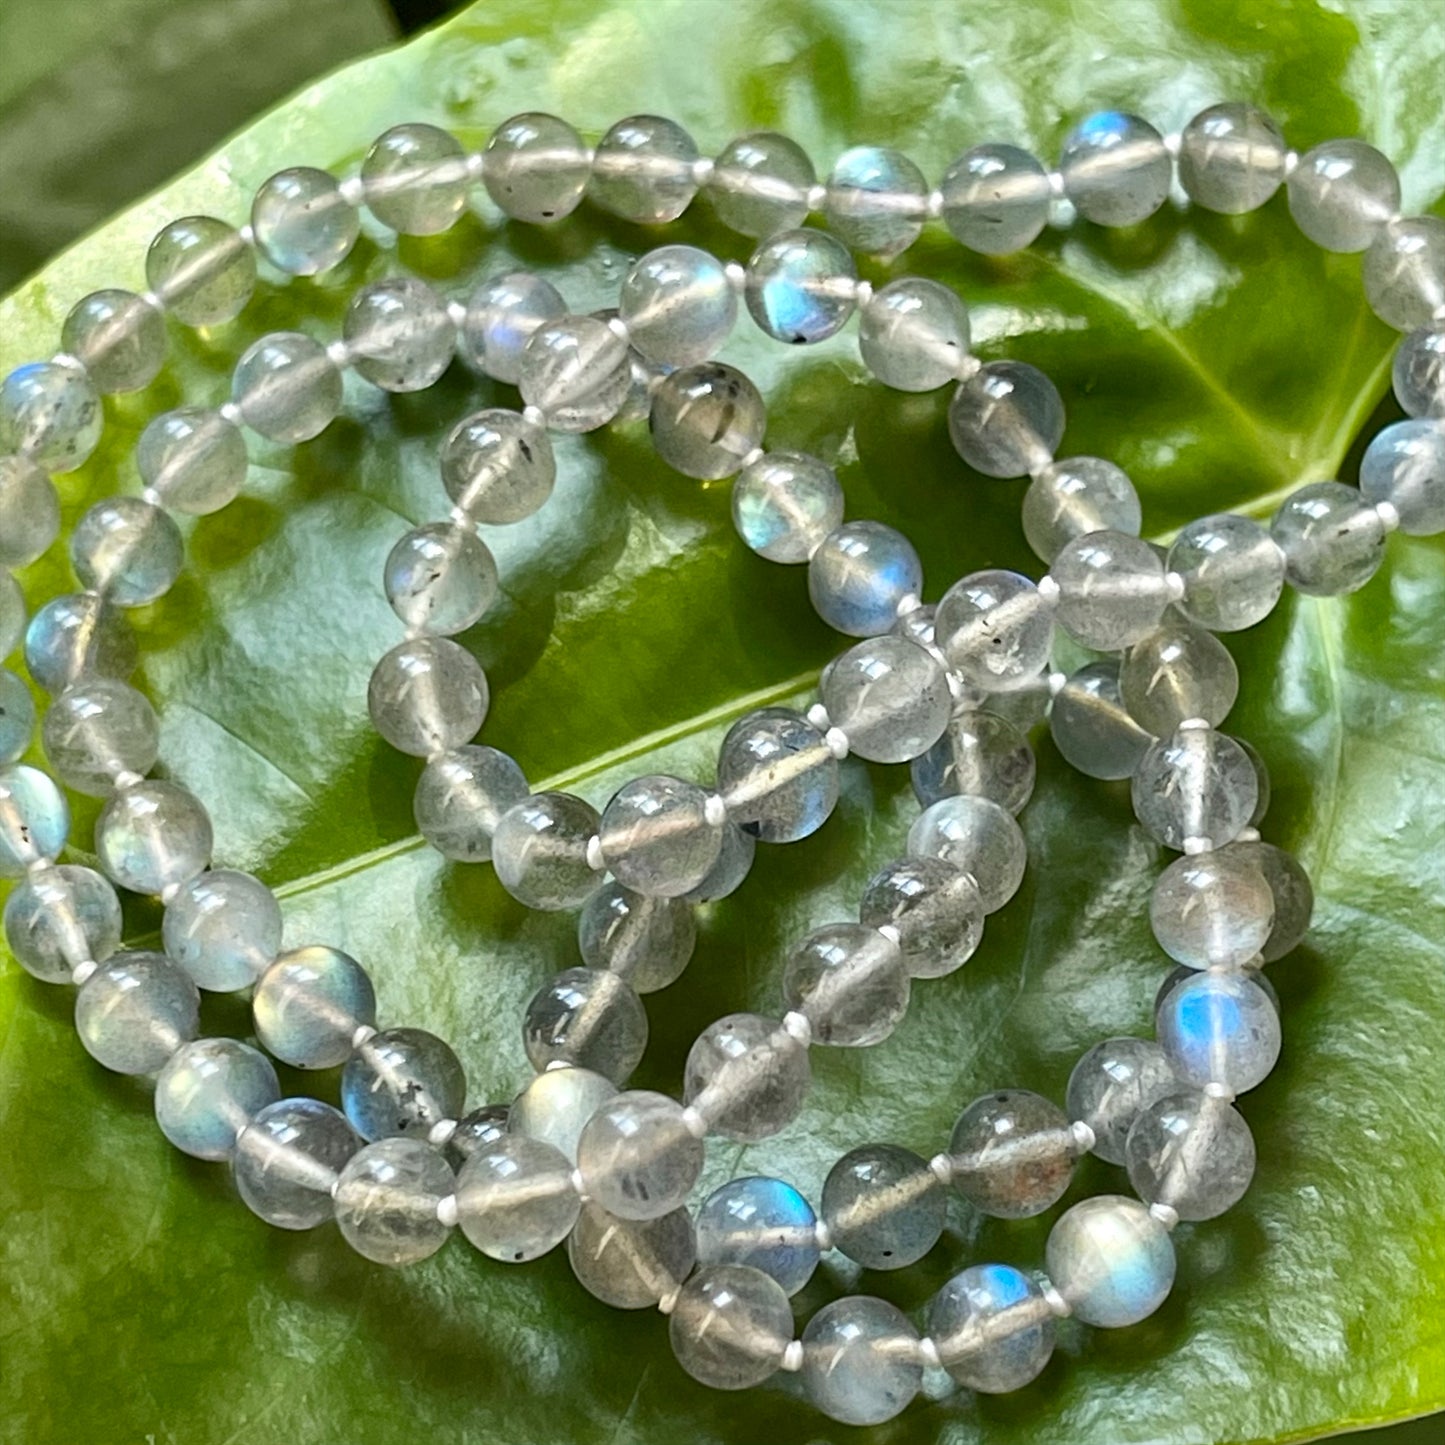 Crystal healing Labradorite necklace known for energy protection laying on a leaf